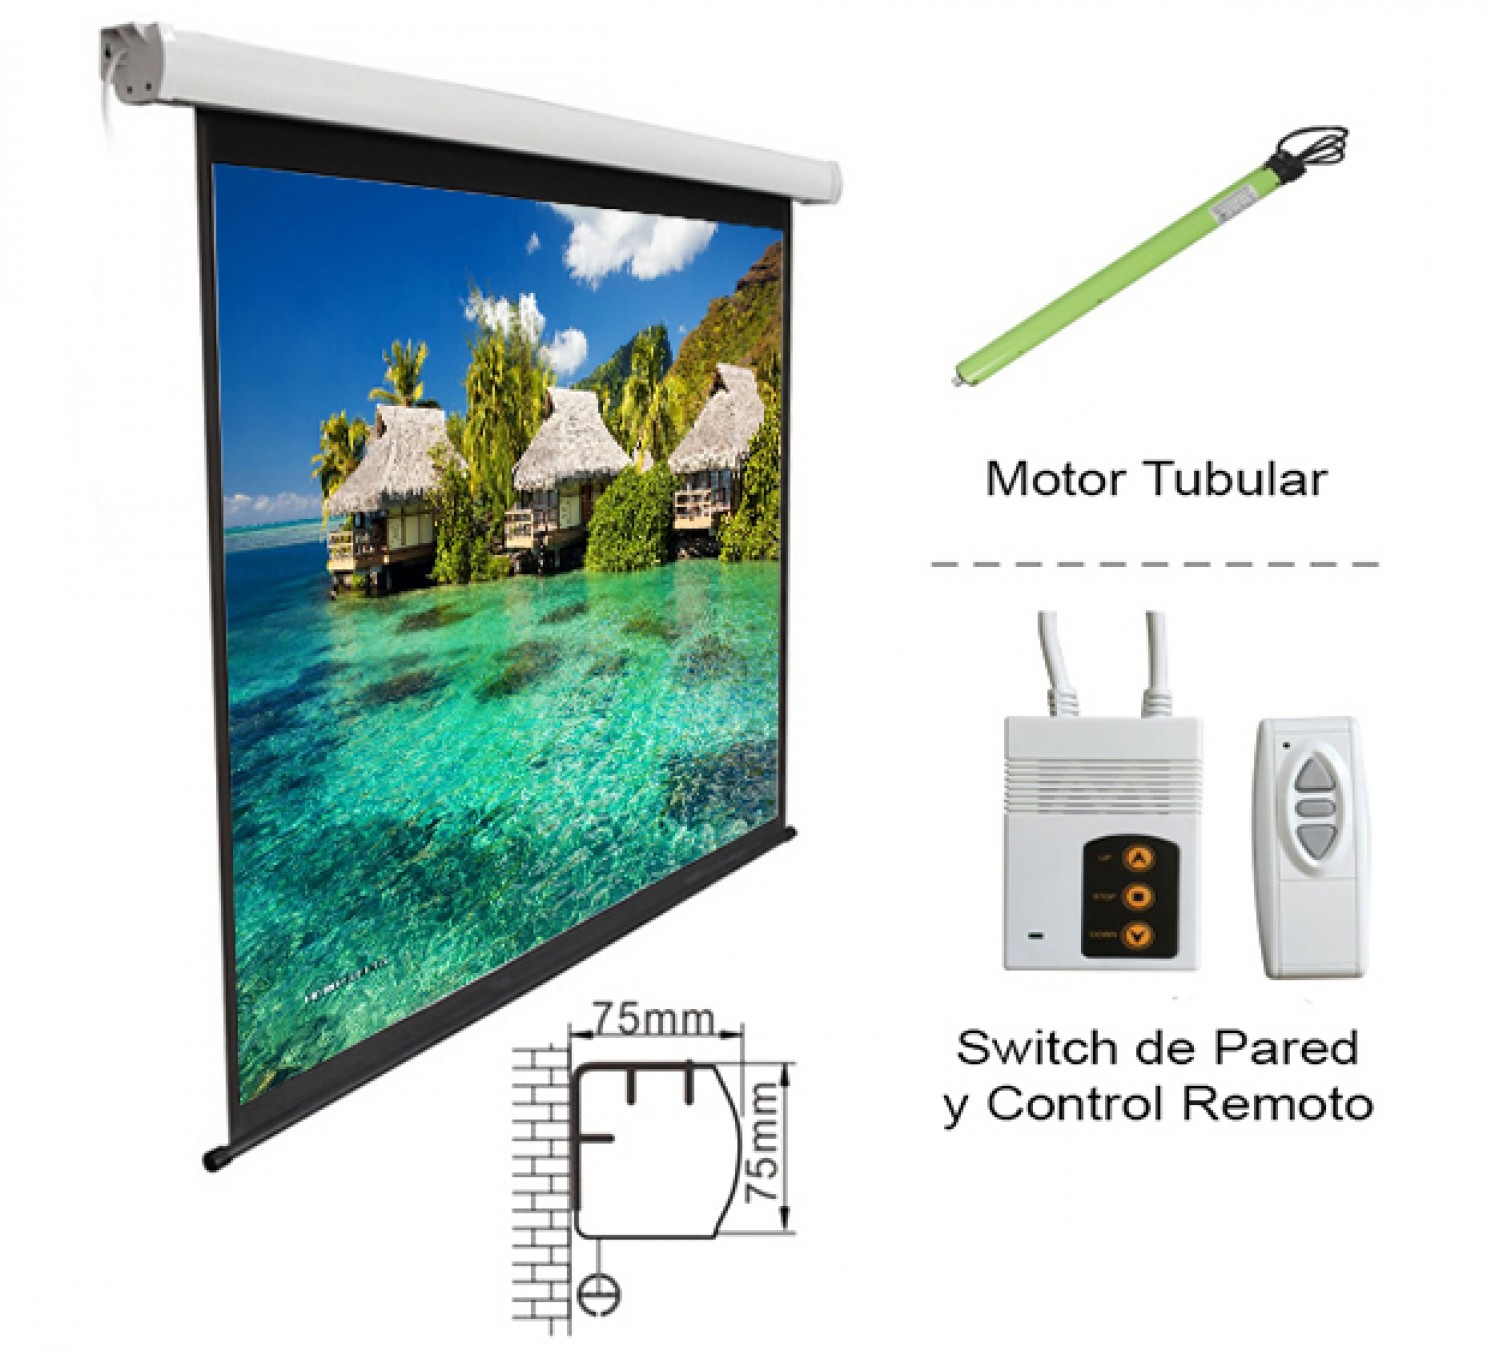 PANTALLA PROYECTOR PARED 150` ELECTRICA INTELAID